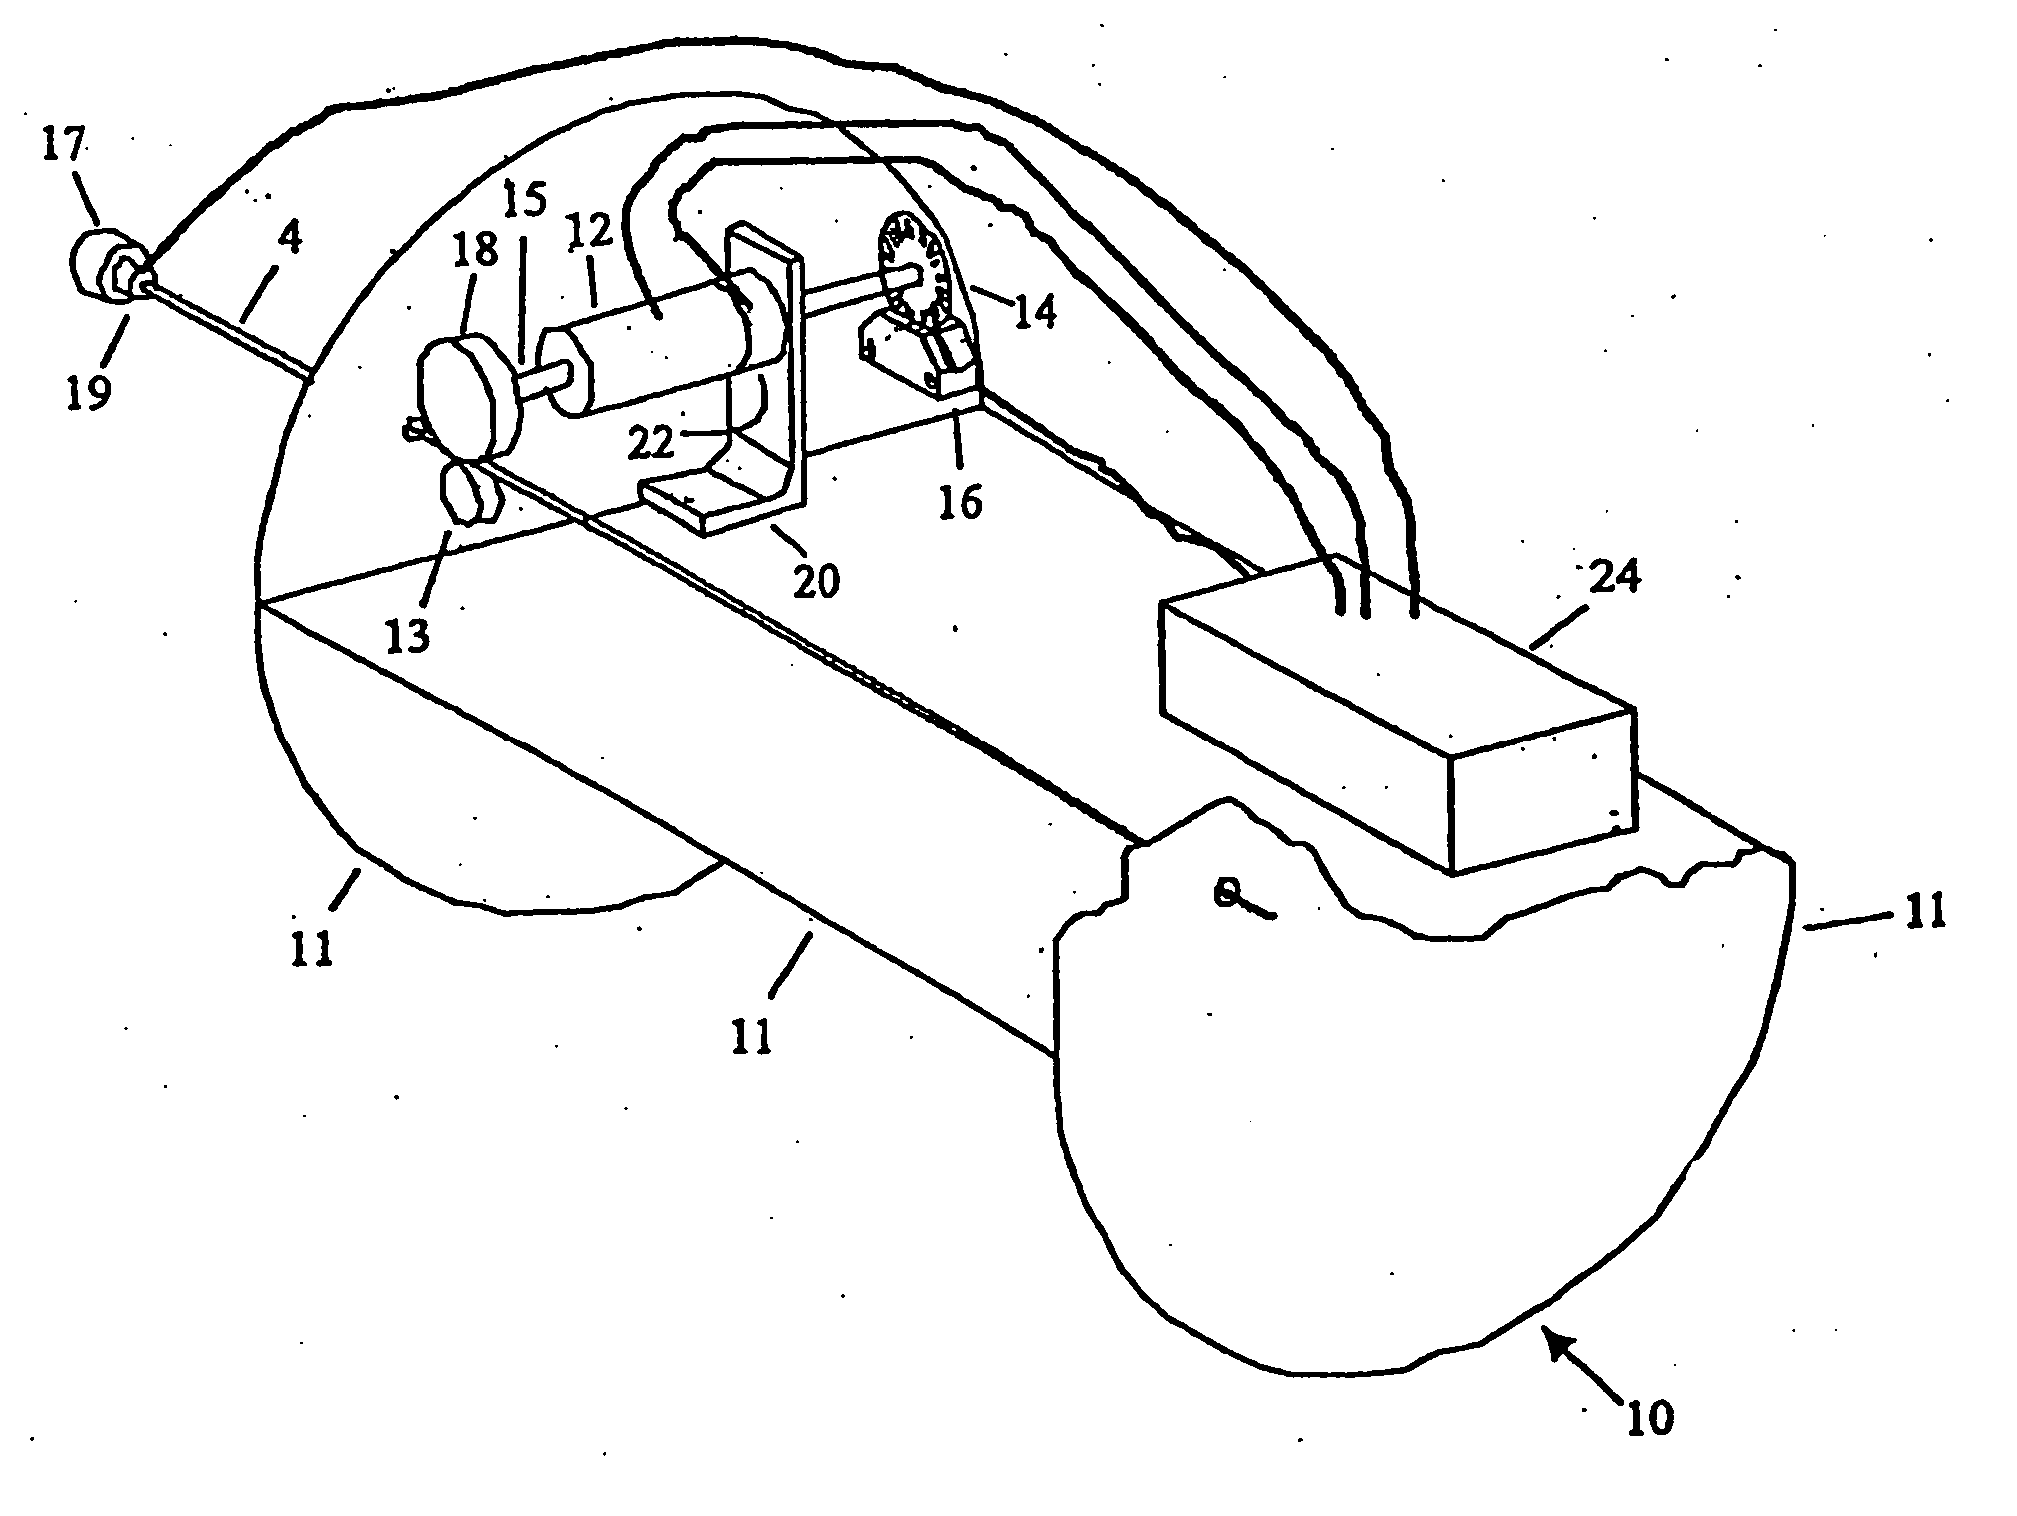 System and method for controlling force applied to and manipulation of medical instruments